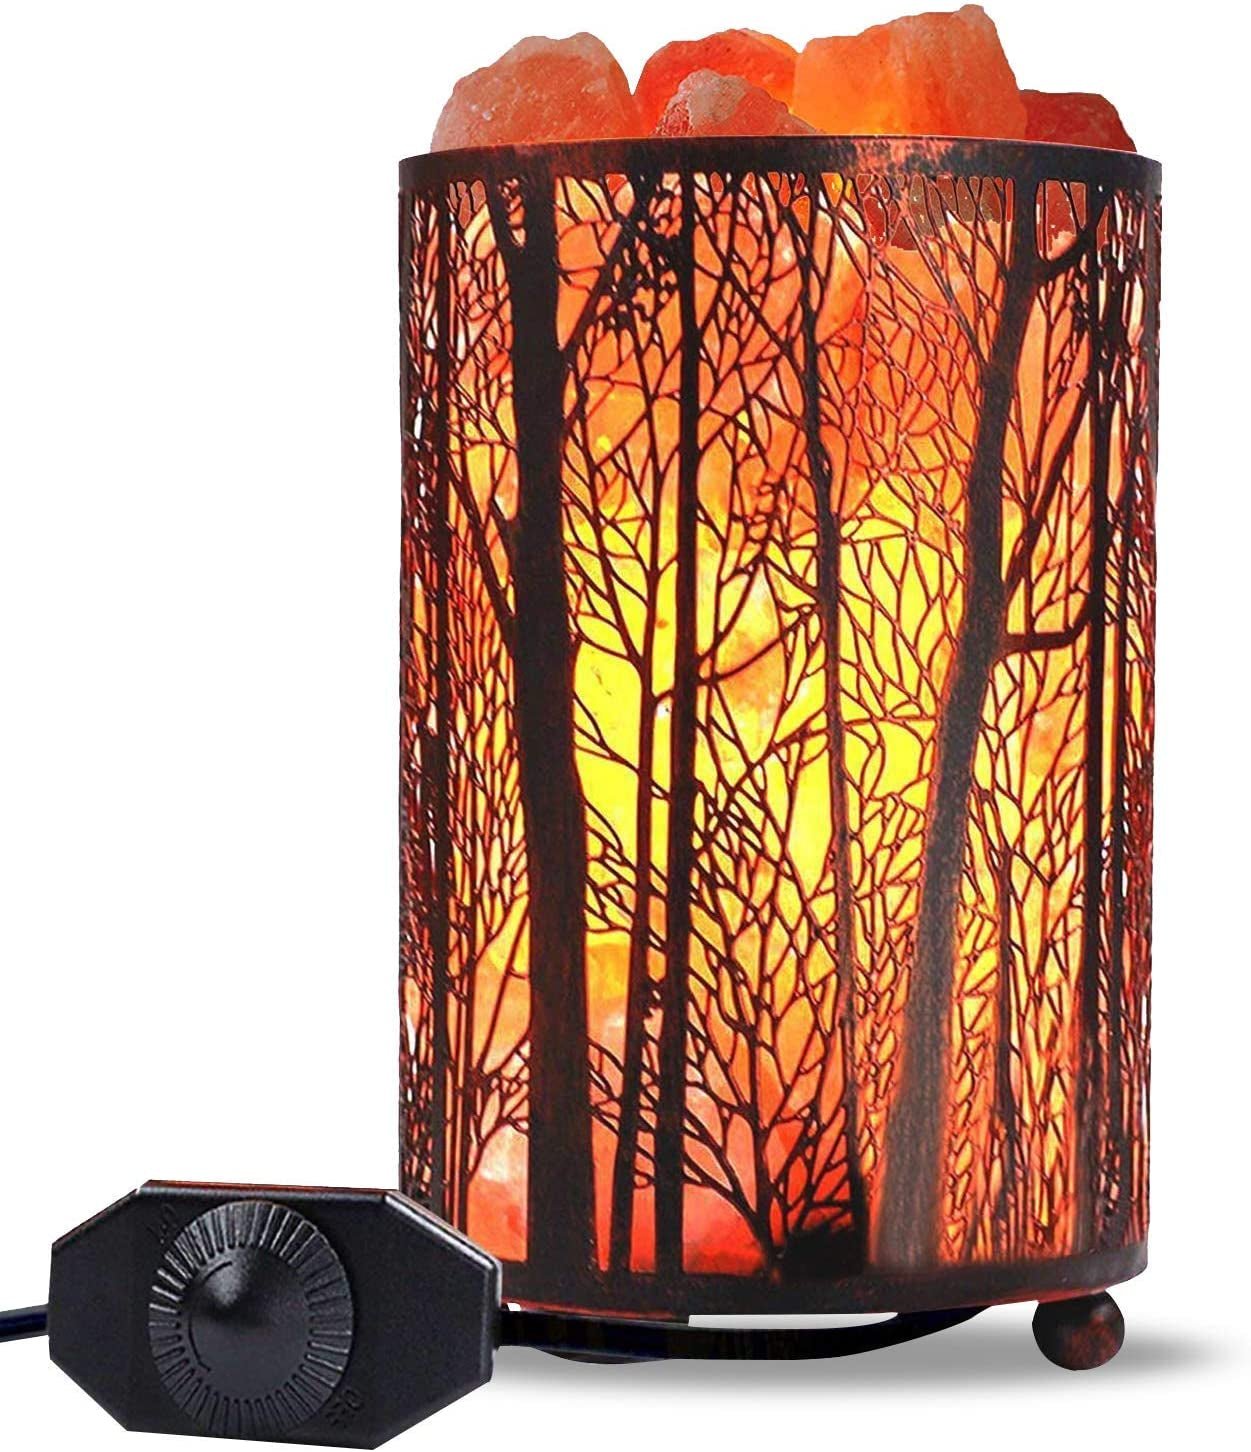 Forest Basket Himalayan Salt Lamp - Best Rock Lamp for Ambient Home Lighting - Abbycart